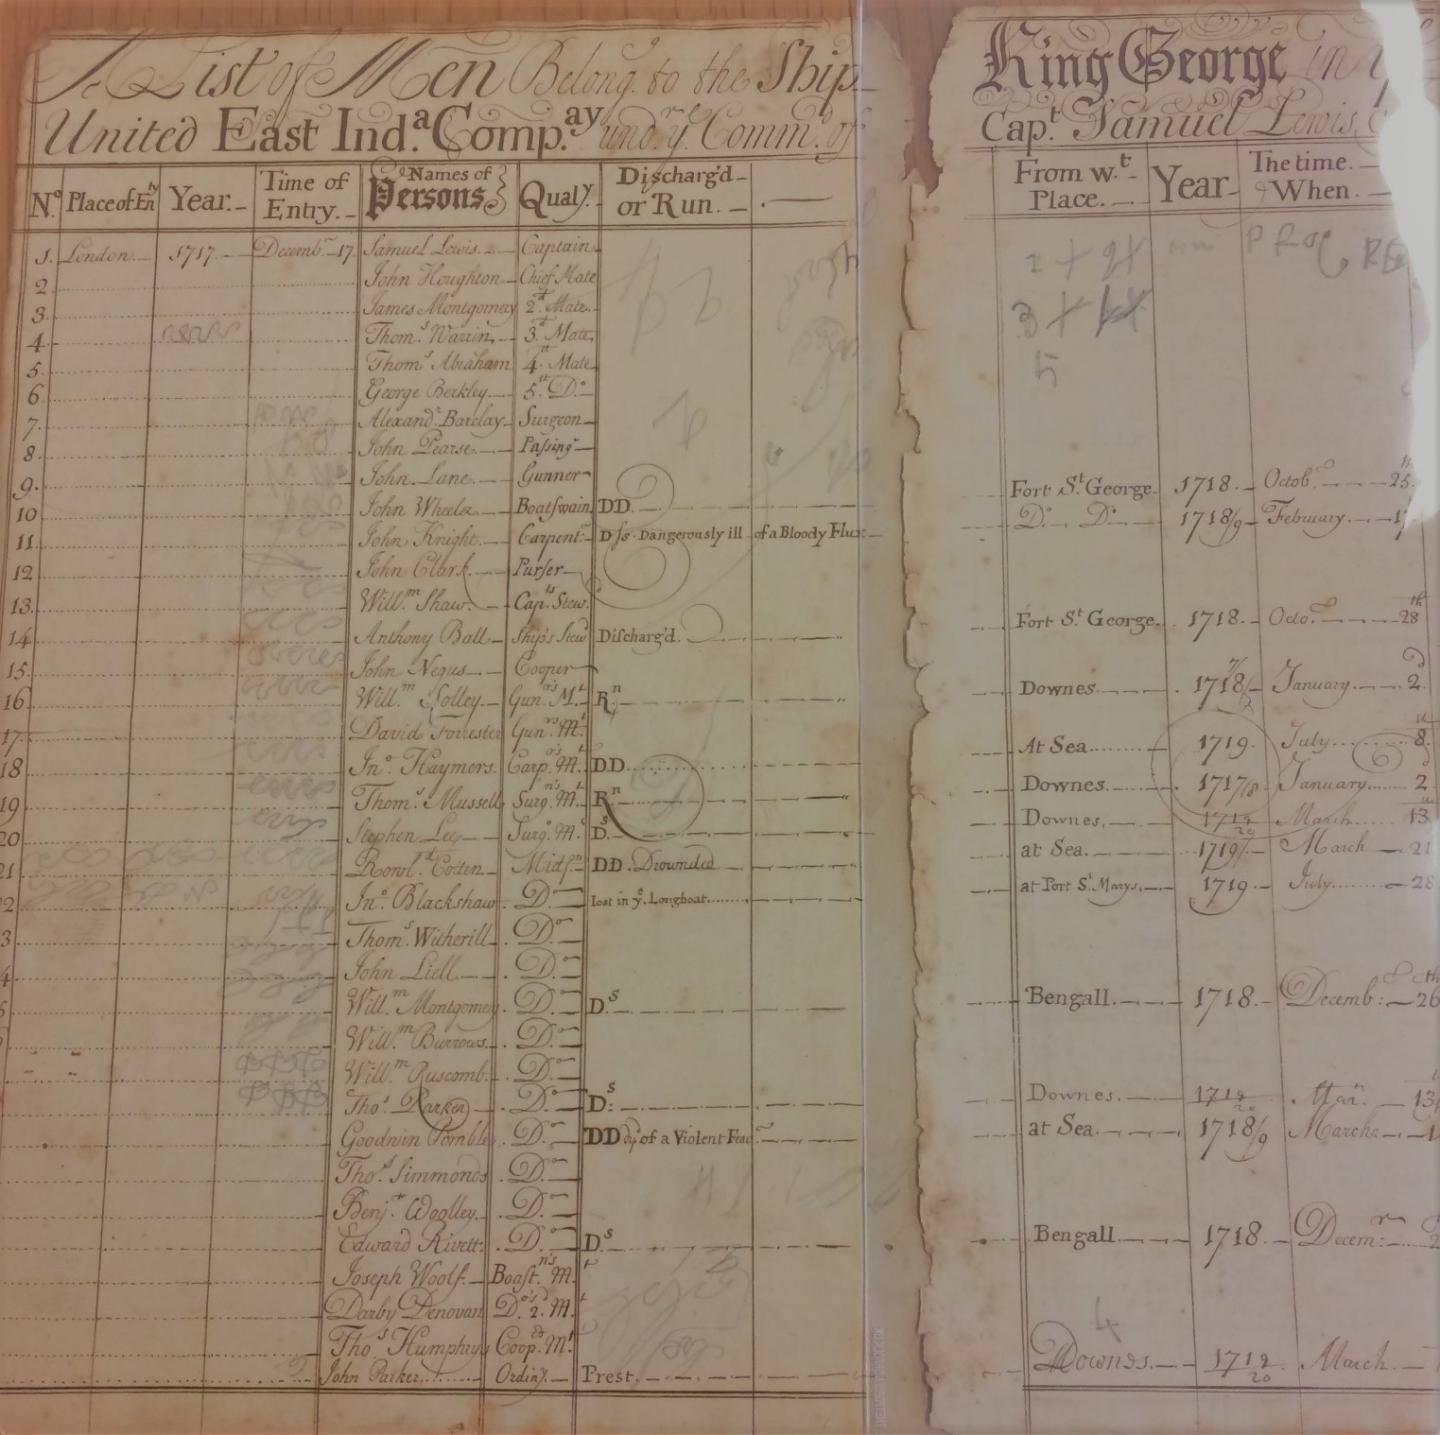 Logbook kept by Capt Samuel Lewis - KING GEORGE, HEIC ship from England to St Hellena (RMG ID: LOG/C/56) 